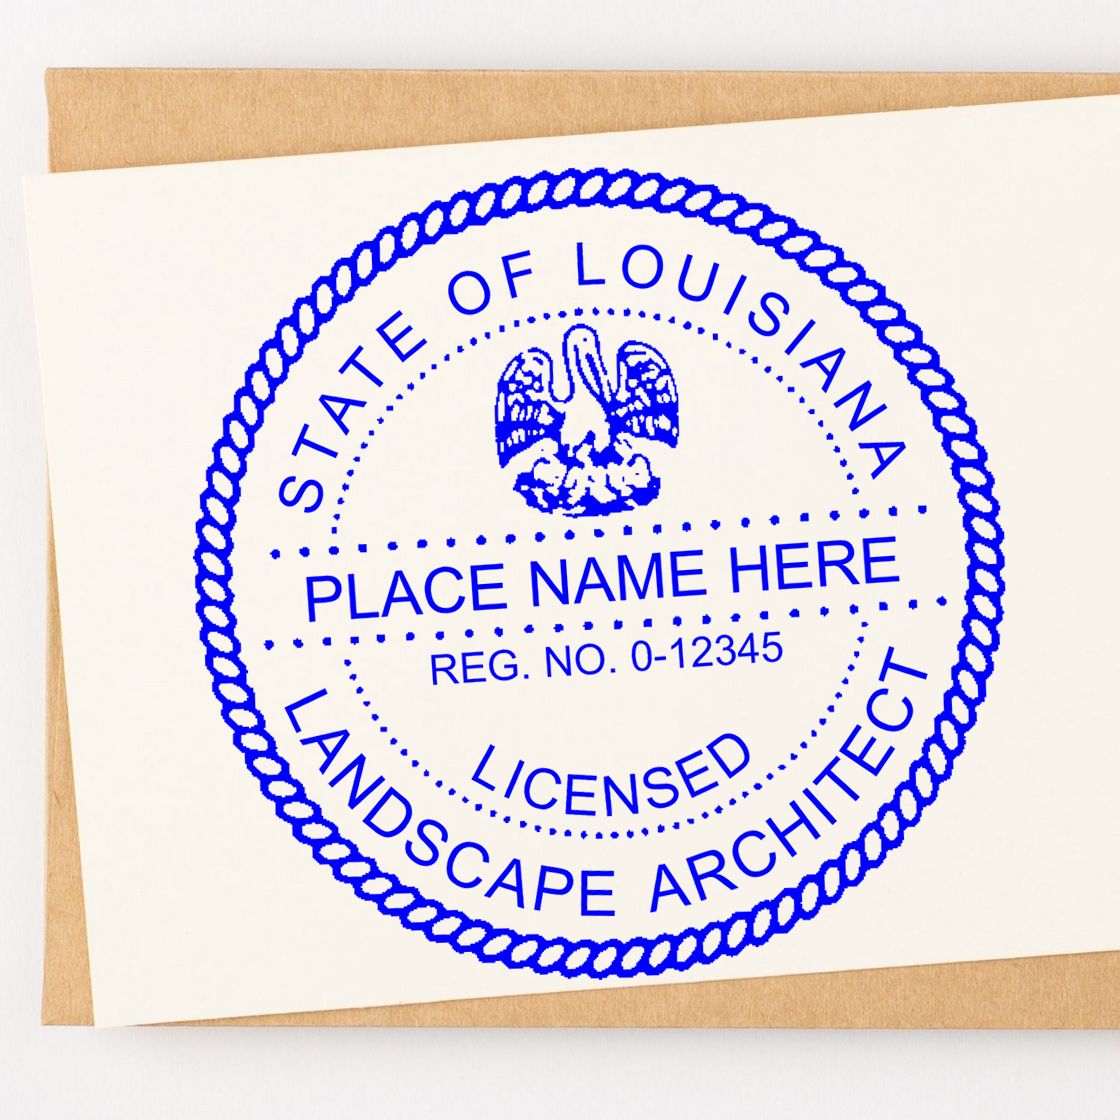 This paper is stamped with a sample imprint of the Self-Inking Louisiana Landscape Architect Stamp, signifying its quality and reliability.